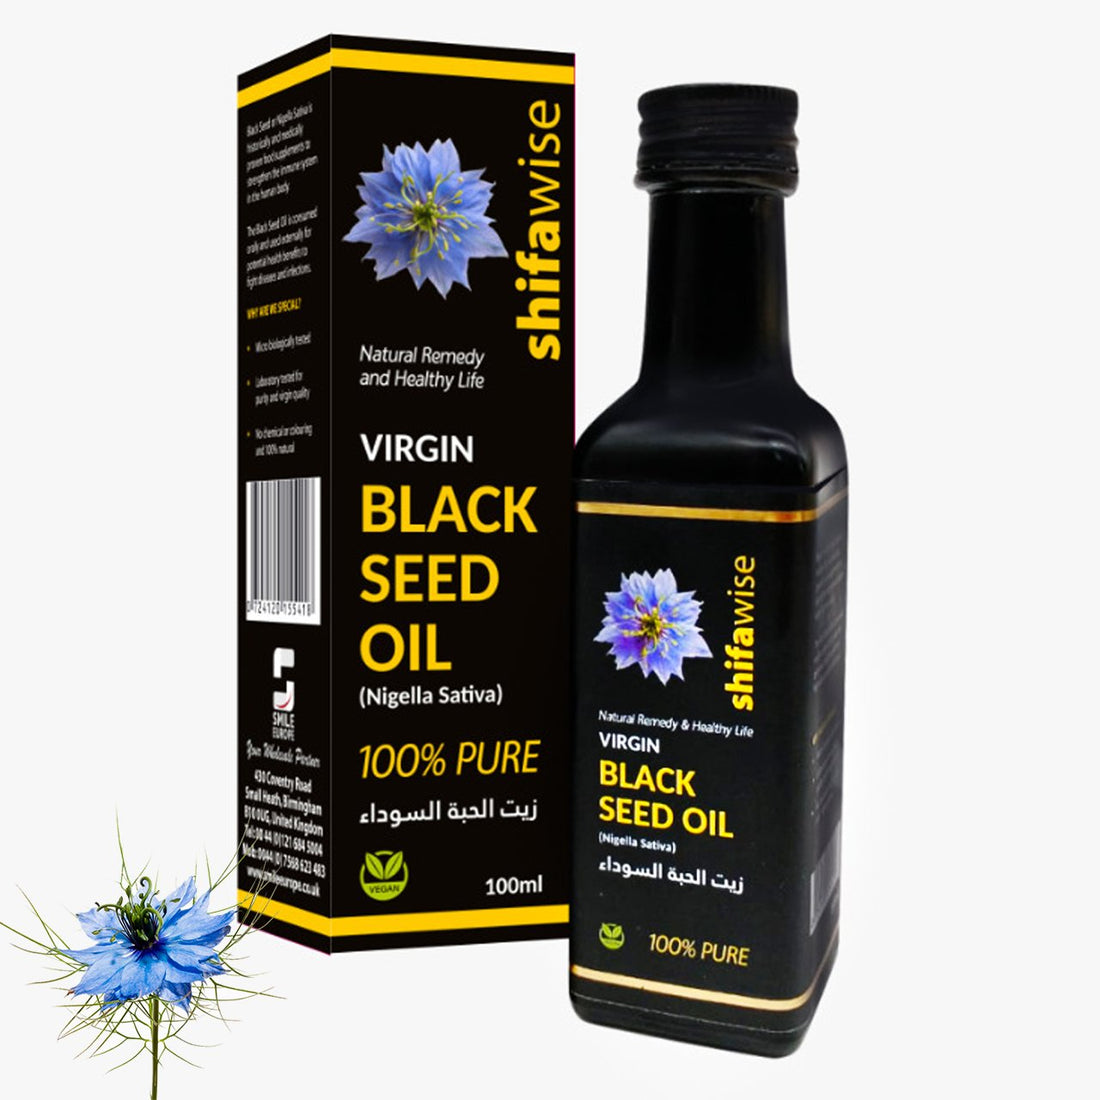 The Miraculous Black Seed Oil: A Connection to the Quran's Healing Powers